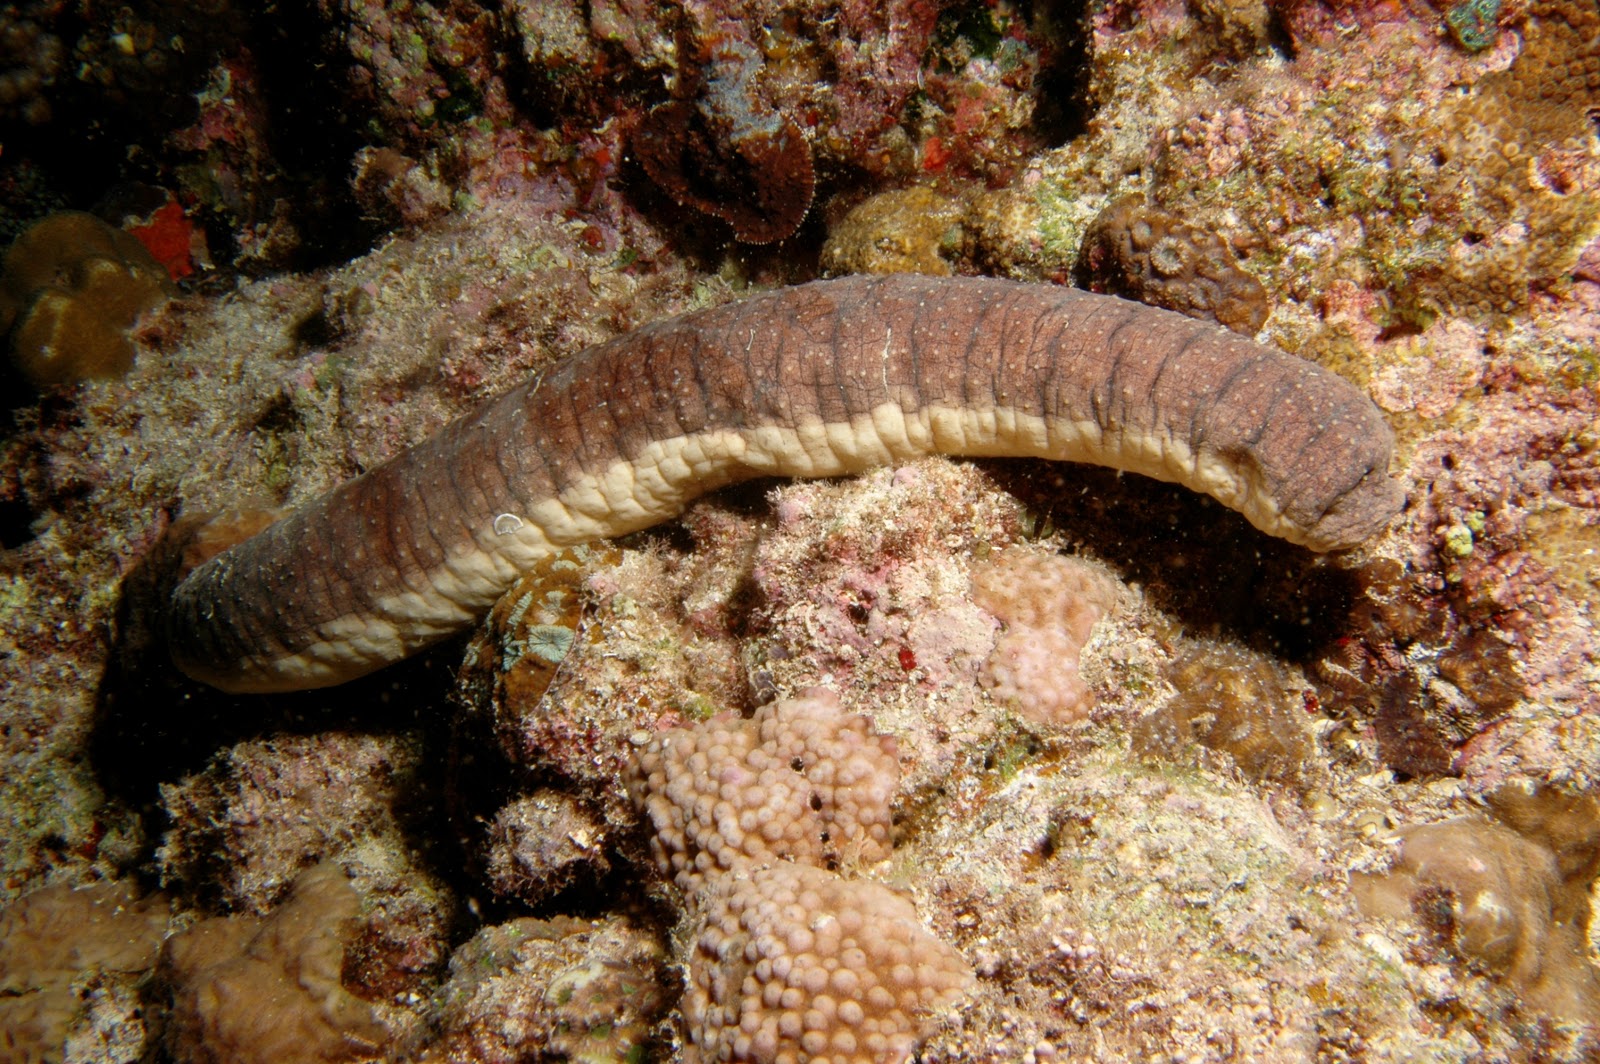 gray cucumber with white belly, underwater on rocks